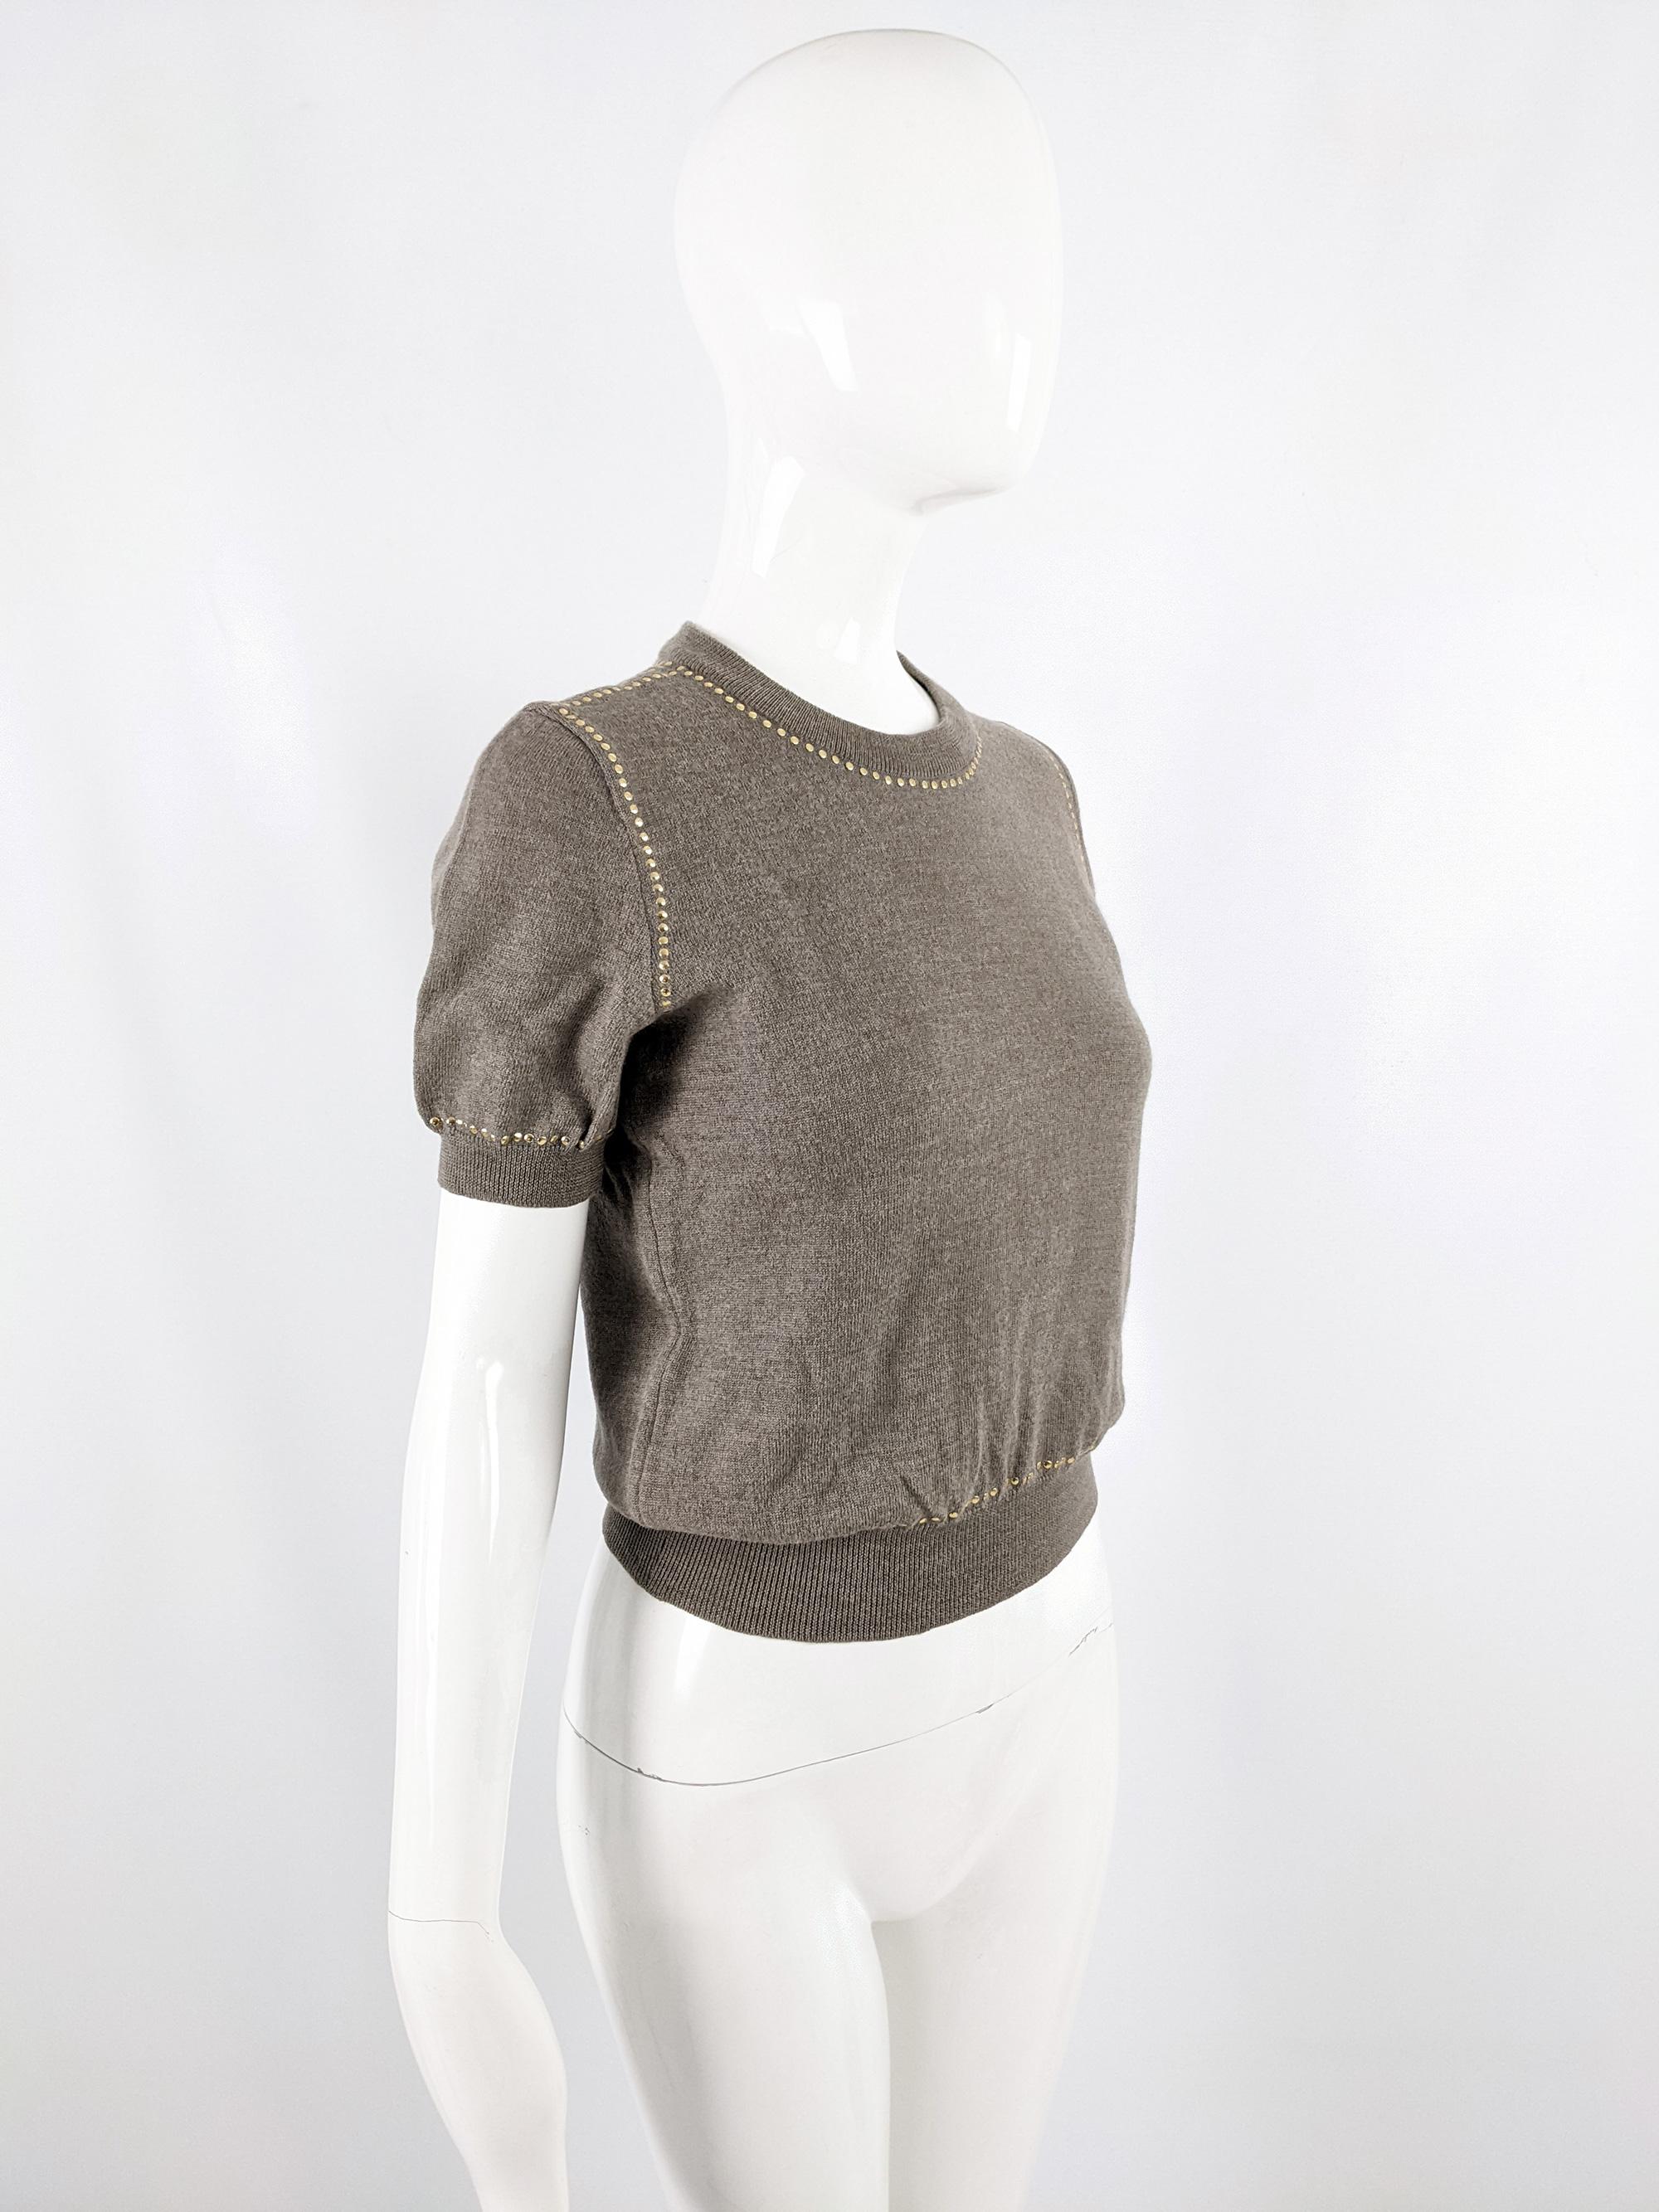 Gray Valentino Vintage Taupe Wool Studded Puff Sleeve Knitwear Sweater Jumper, 1980s